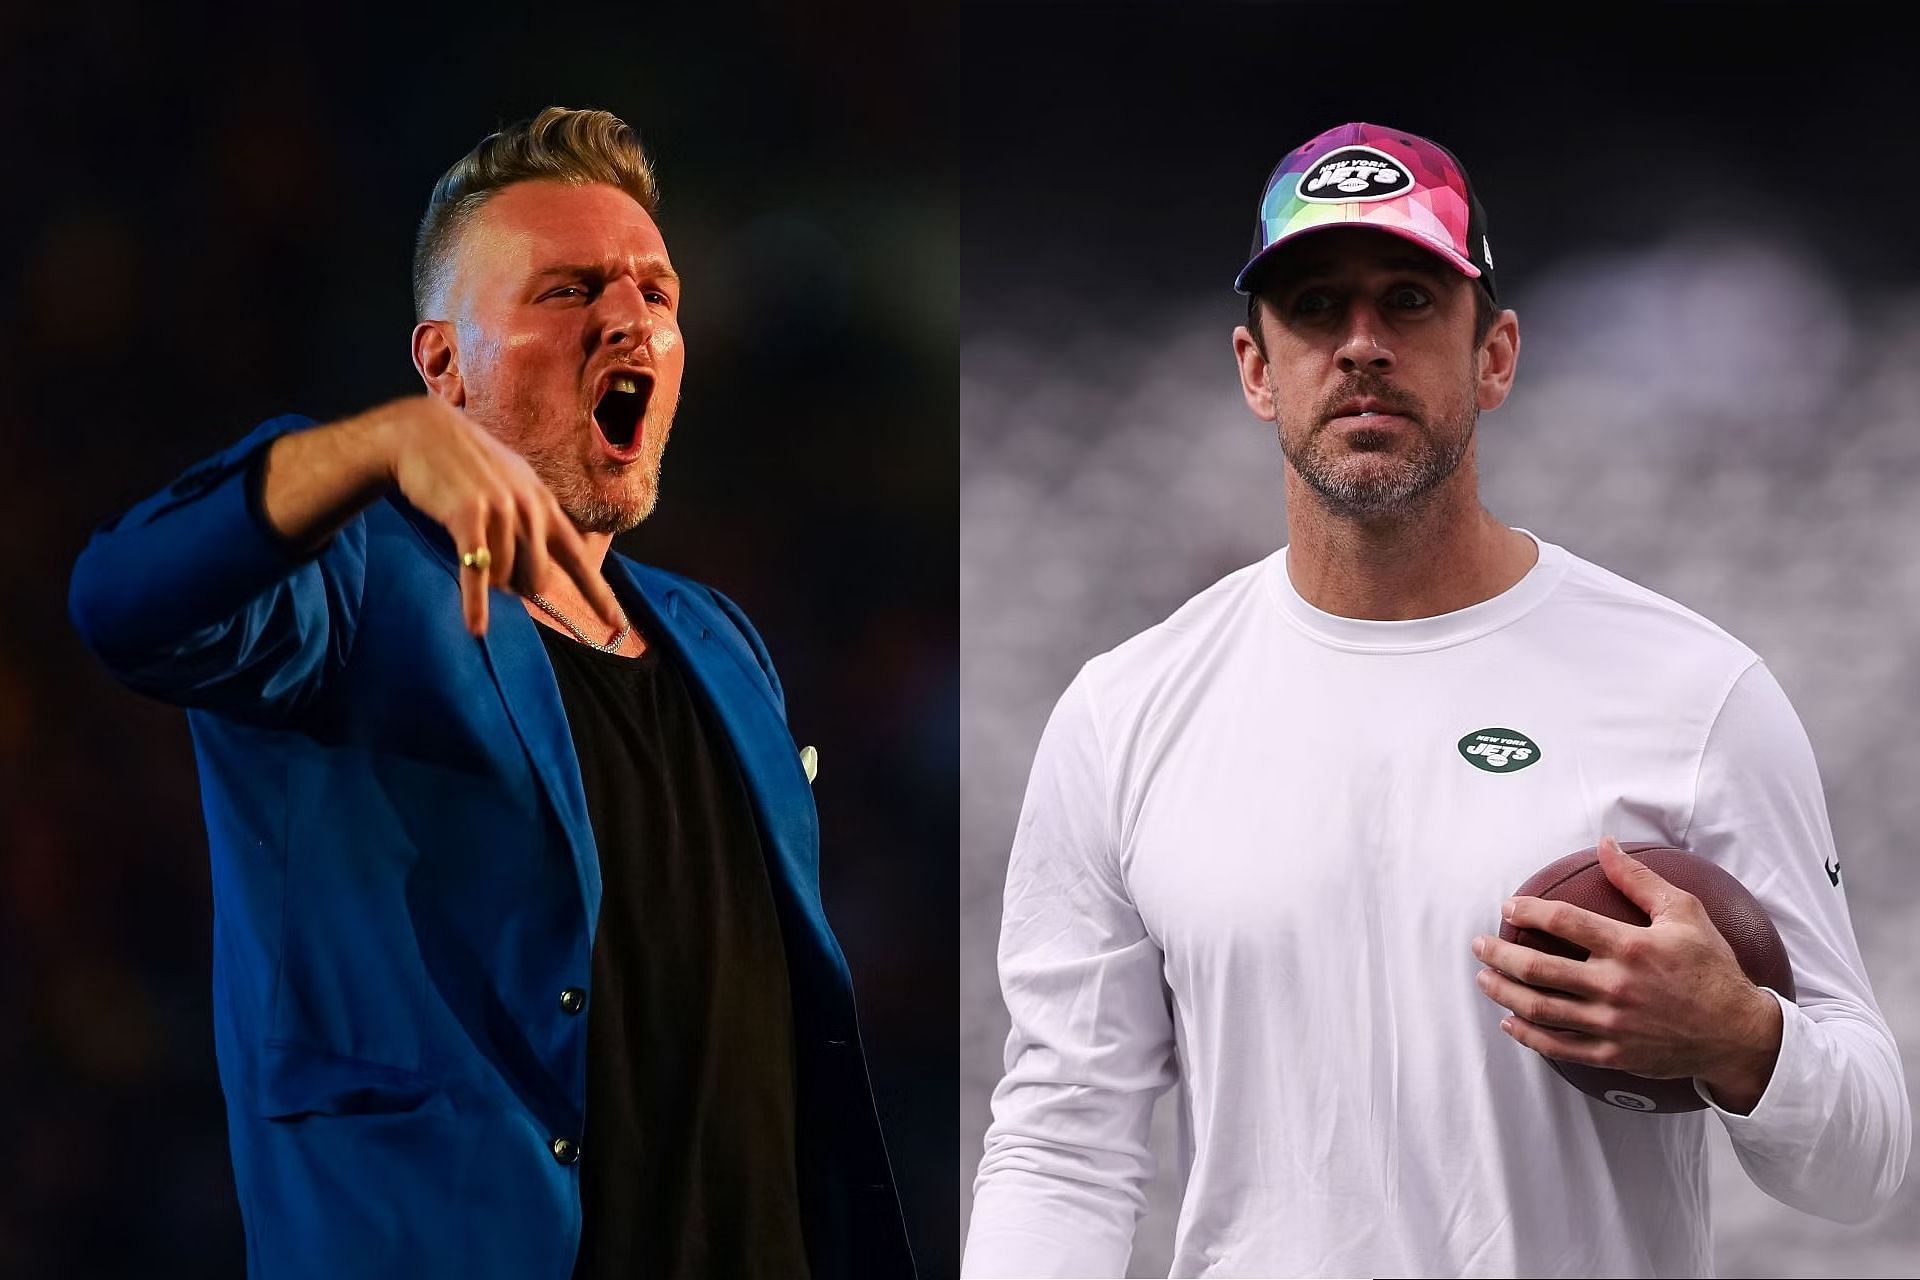 Aaron Rodgers gets slammed by Gregg Doyel for anti-vaccine movement on Pat McAfee Show